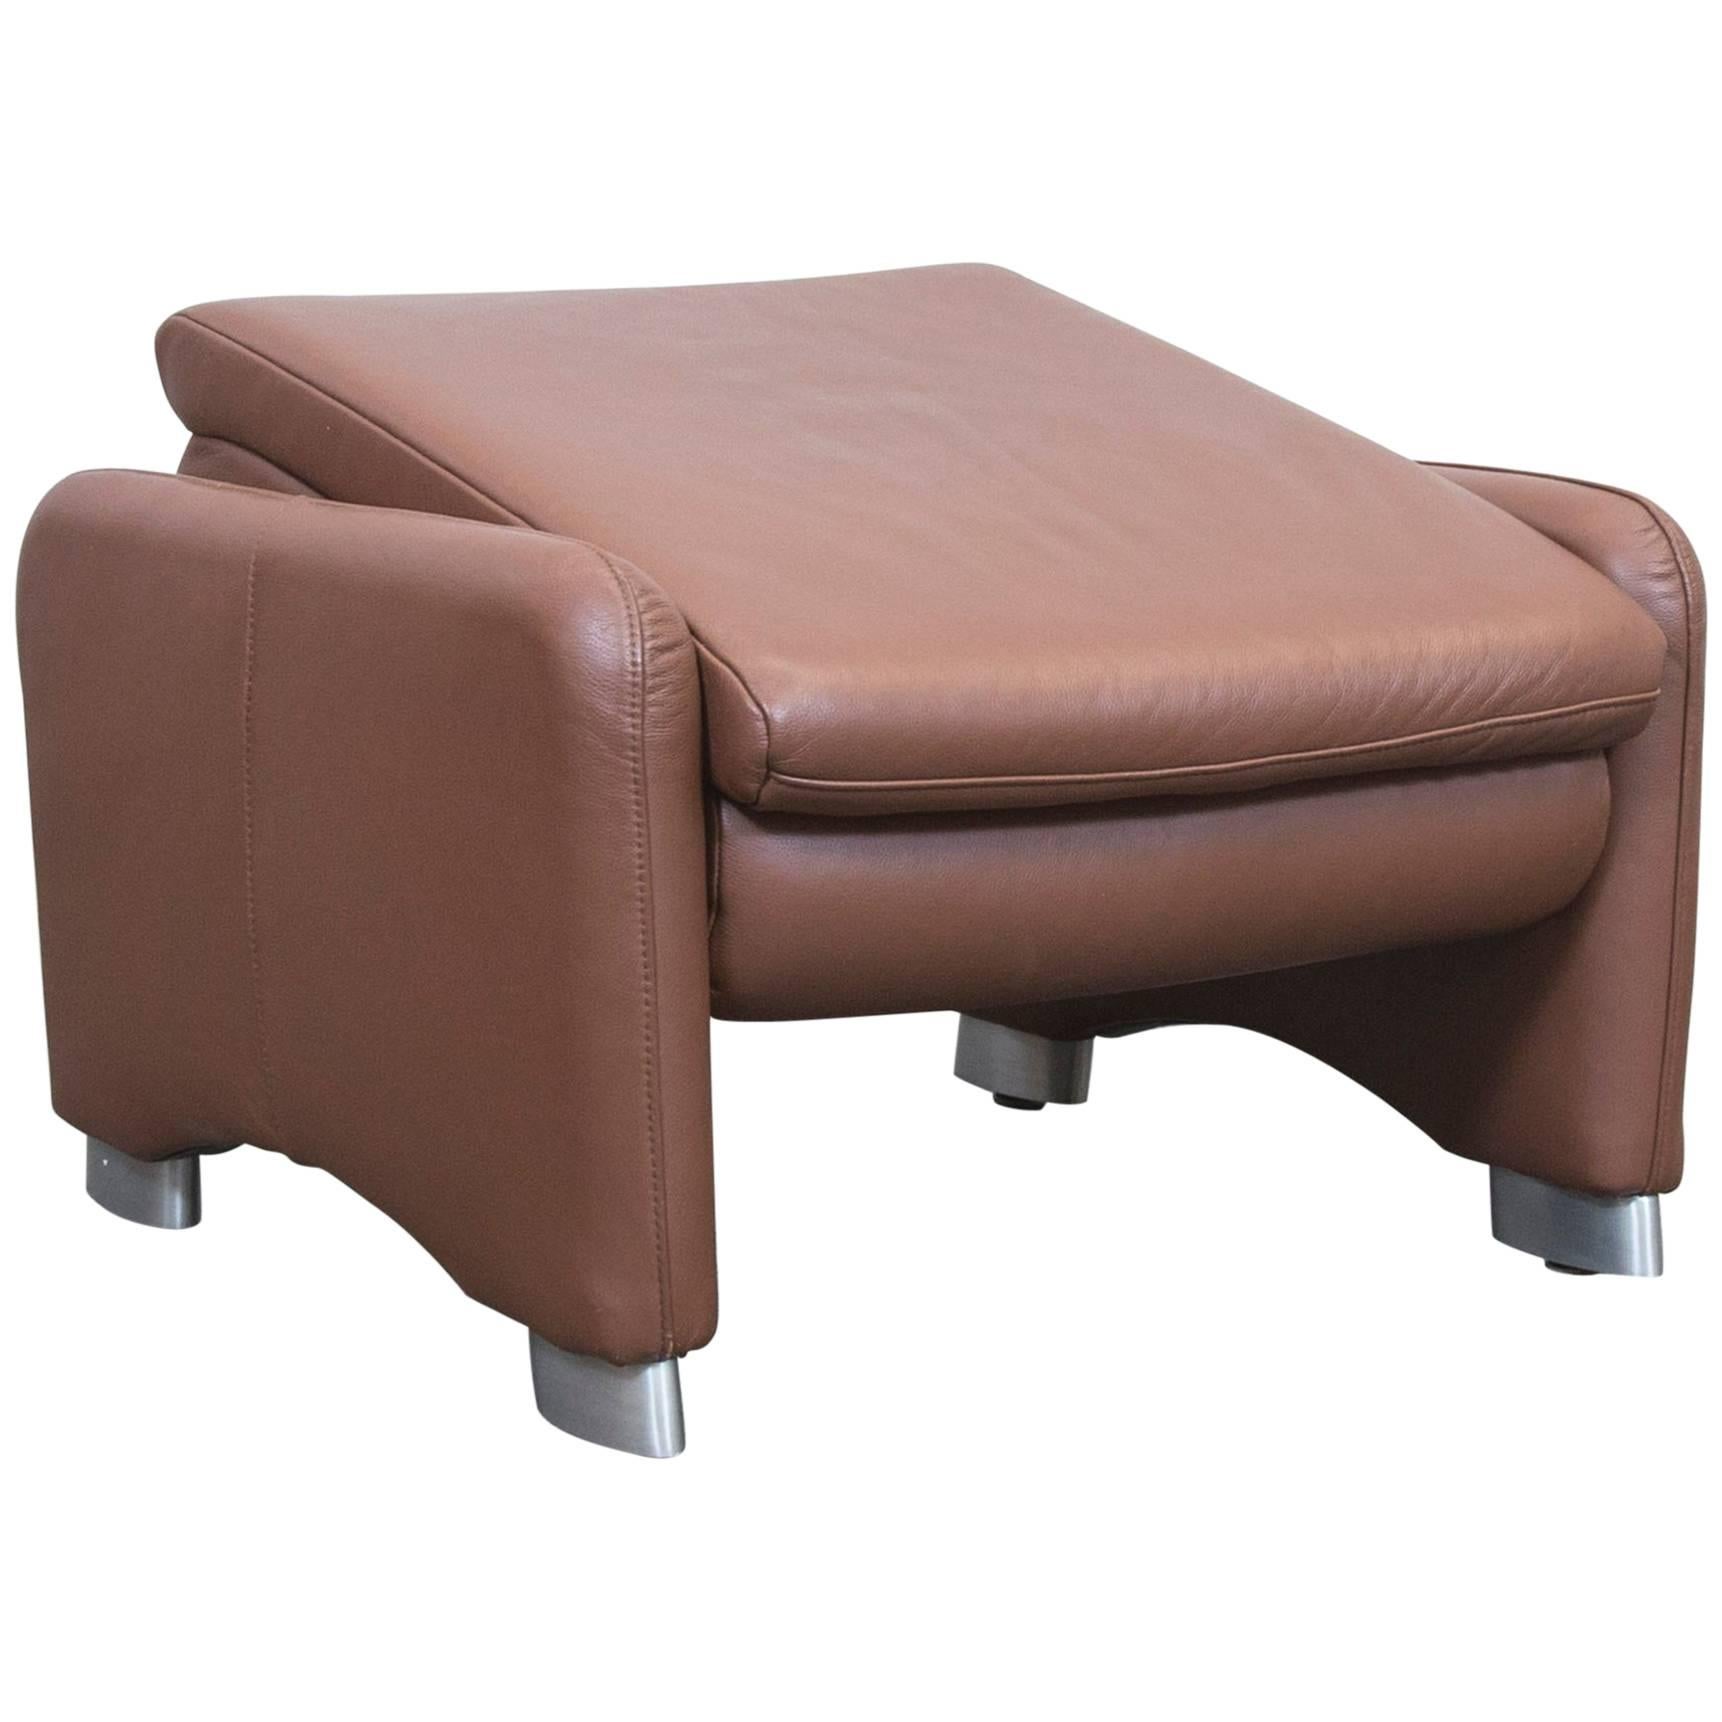 Hülsta Designer Footstool Pouff Brown Leather Function Couch Modern